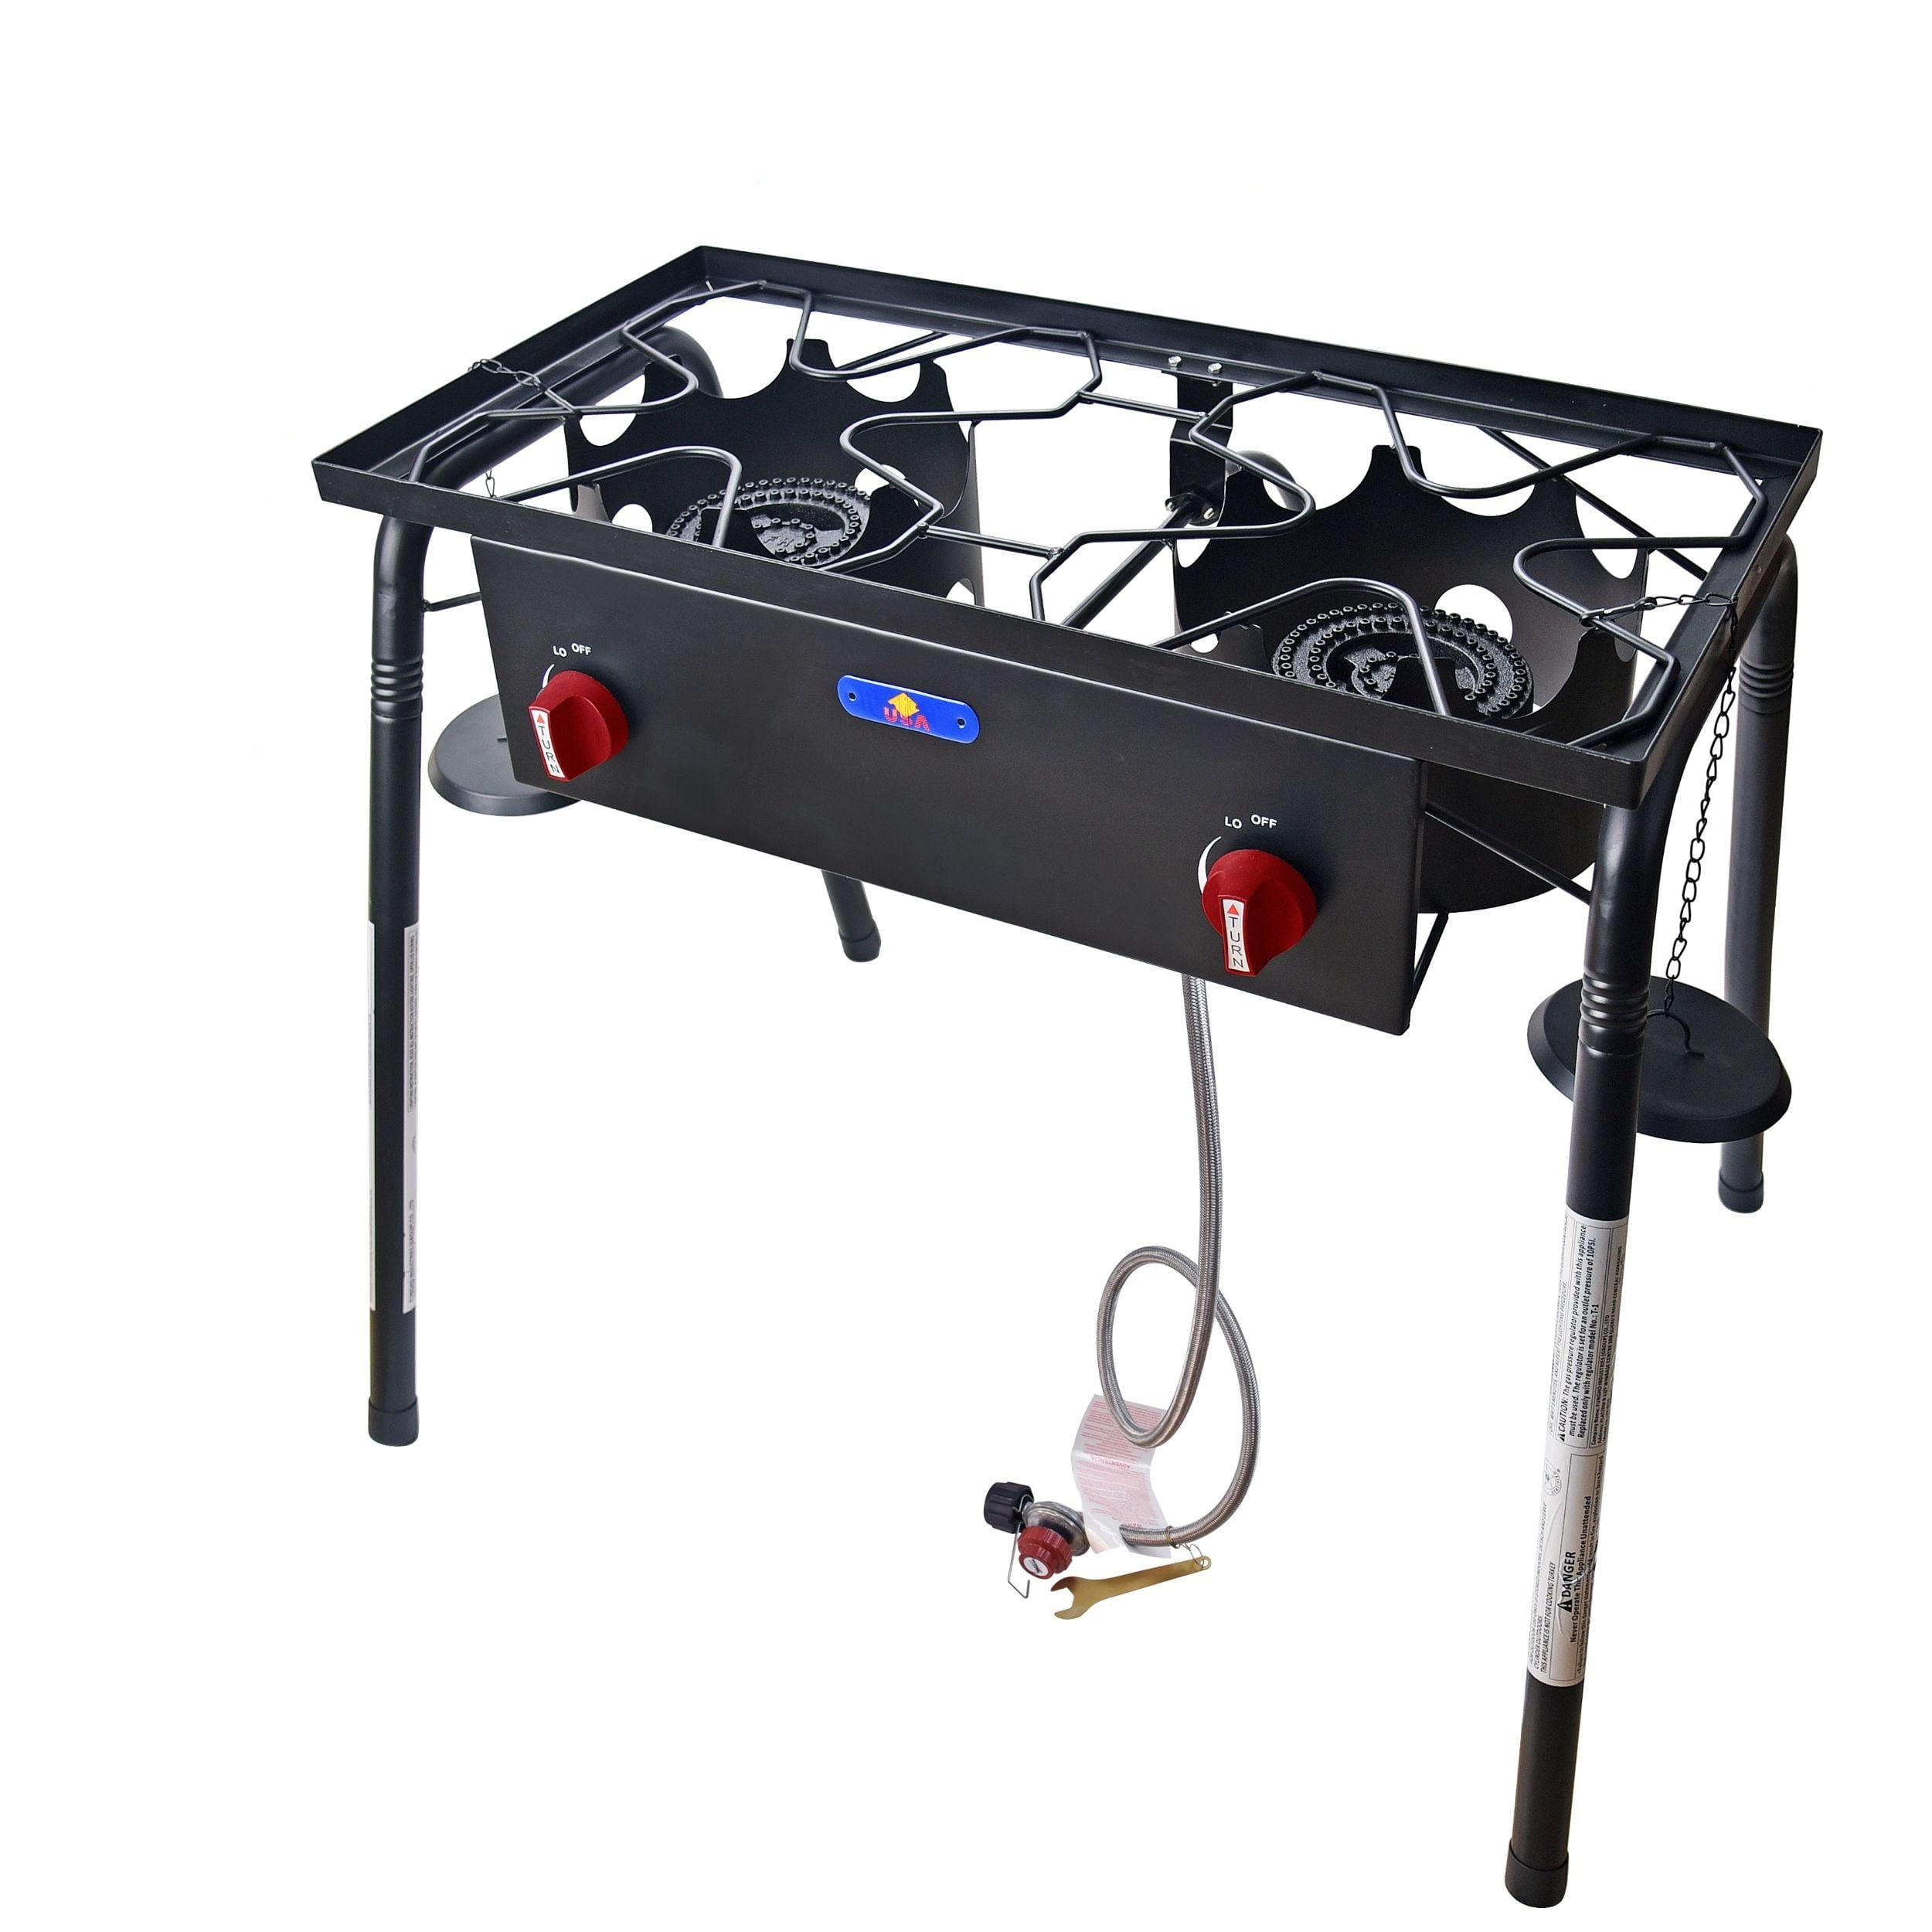 NEW FOLDING DOUBLE BURNER/GRILL CAMPING BUSHCRAFT h 